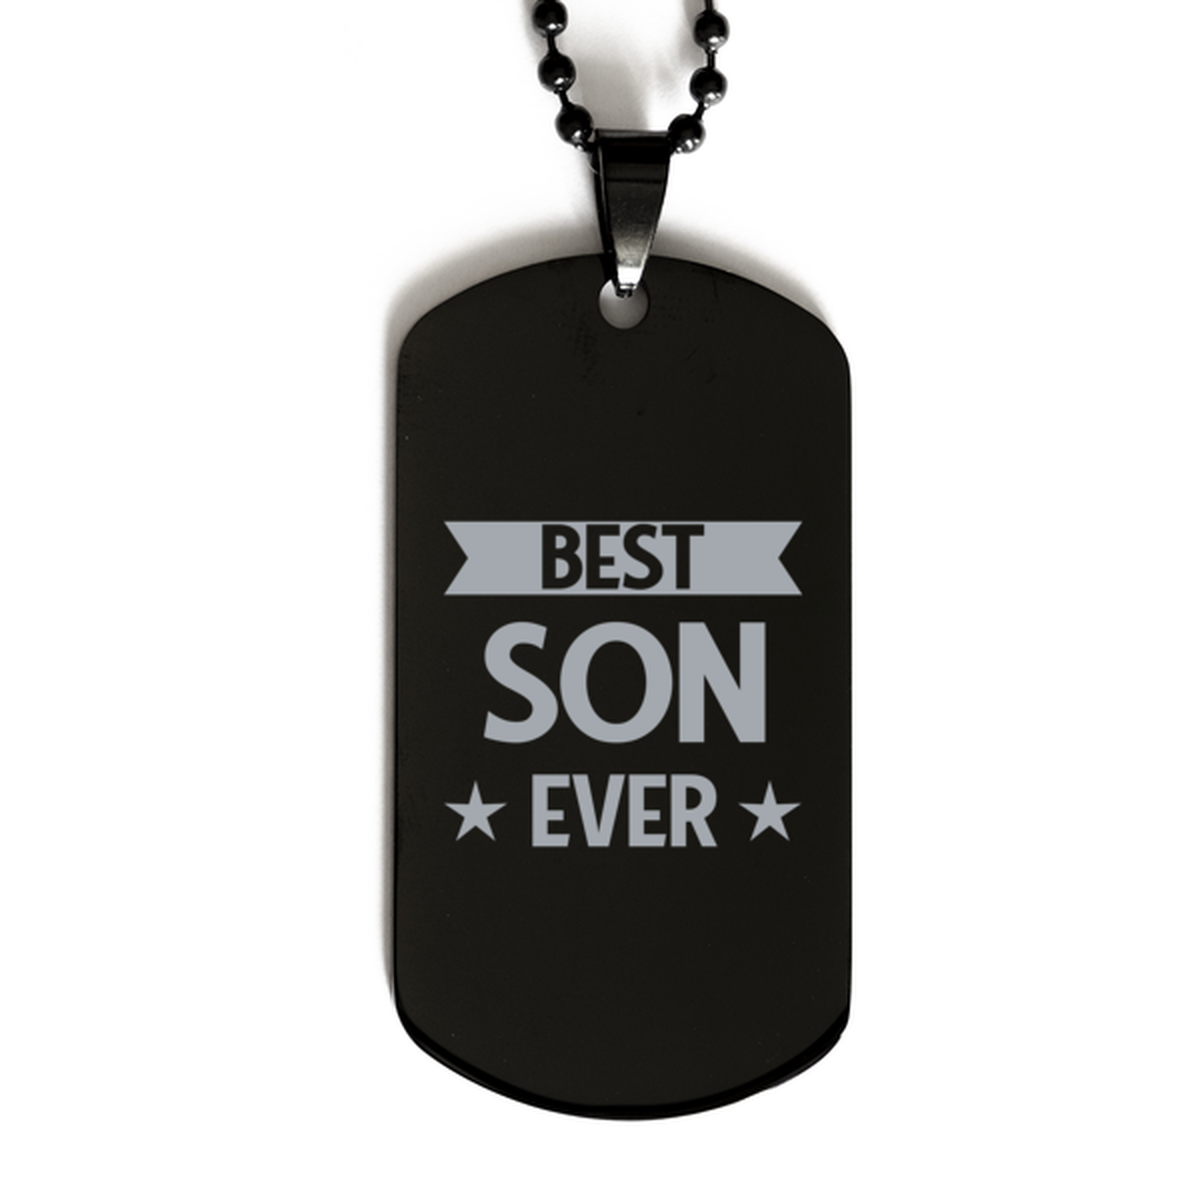 Best Son Ever Son Gifts, Funny Black Dog Tag For Son, Birthday Family Presents Engraved Necklace For Men